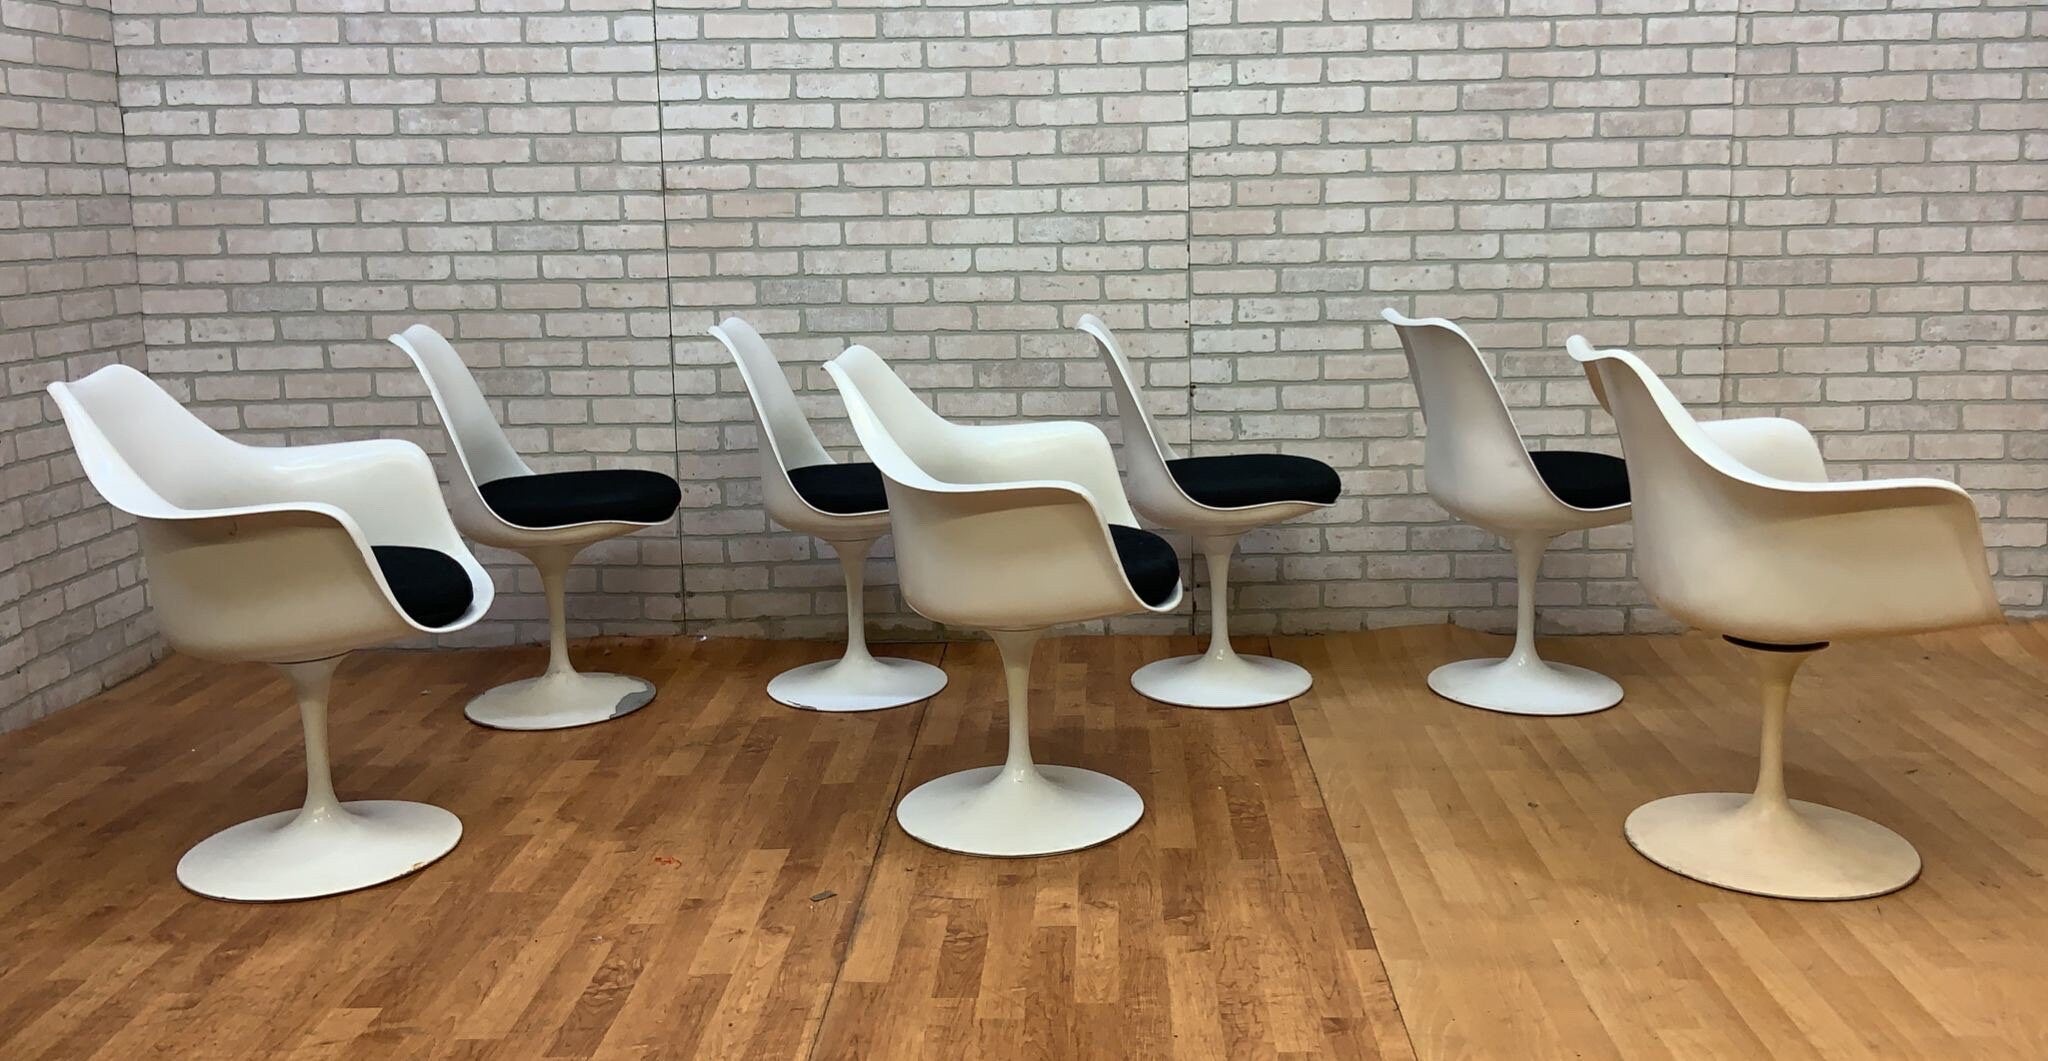 Vintage Tulip Swivel Chairs by Eero Saarinen for Knoll International - 3 Armchairs and 3 Slipper Chairs - Set of 6